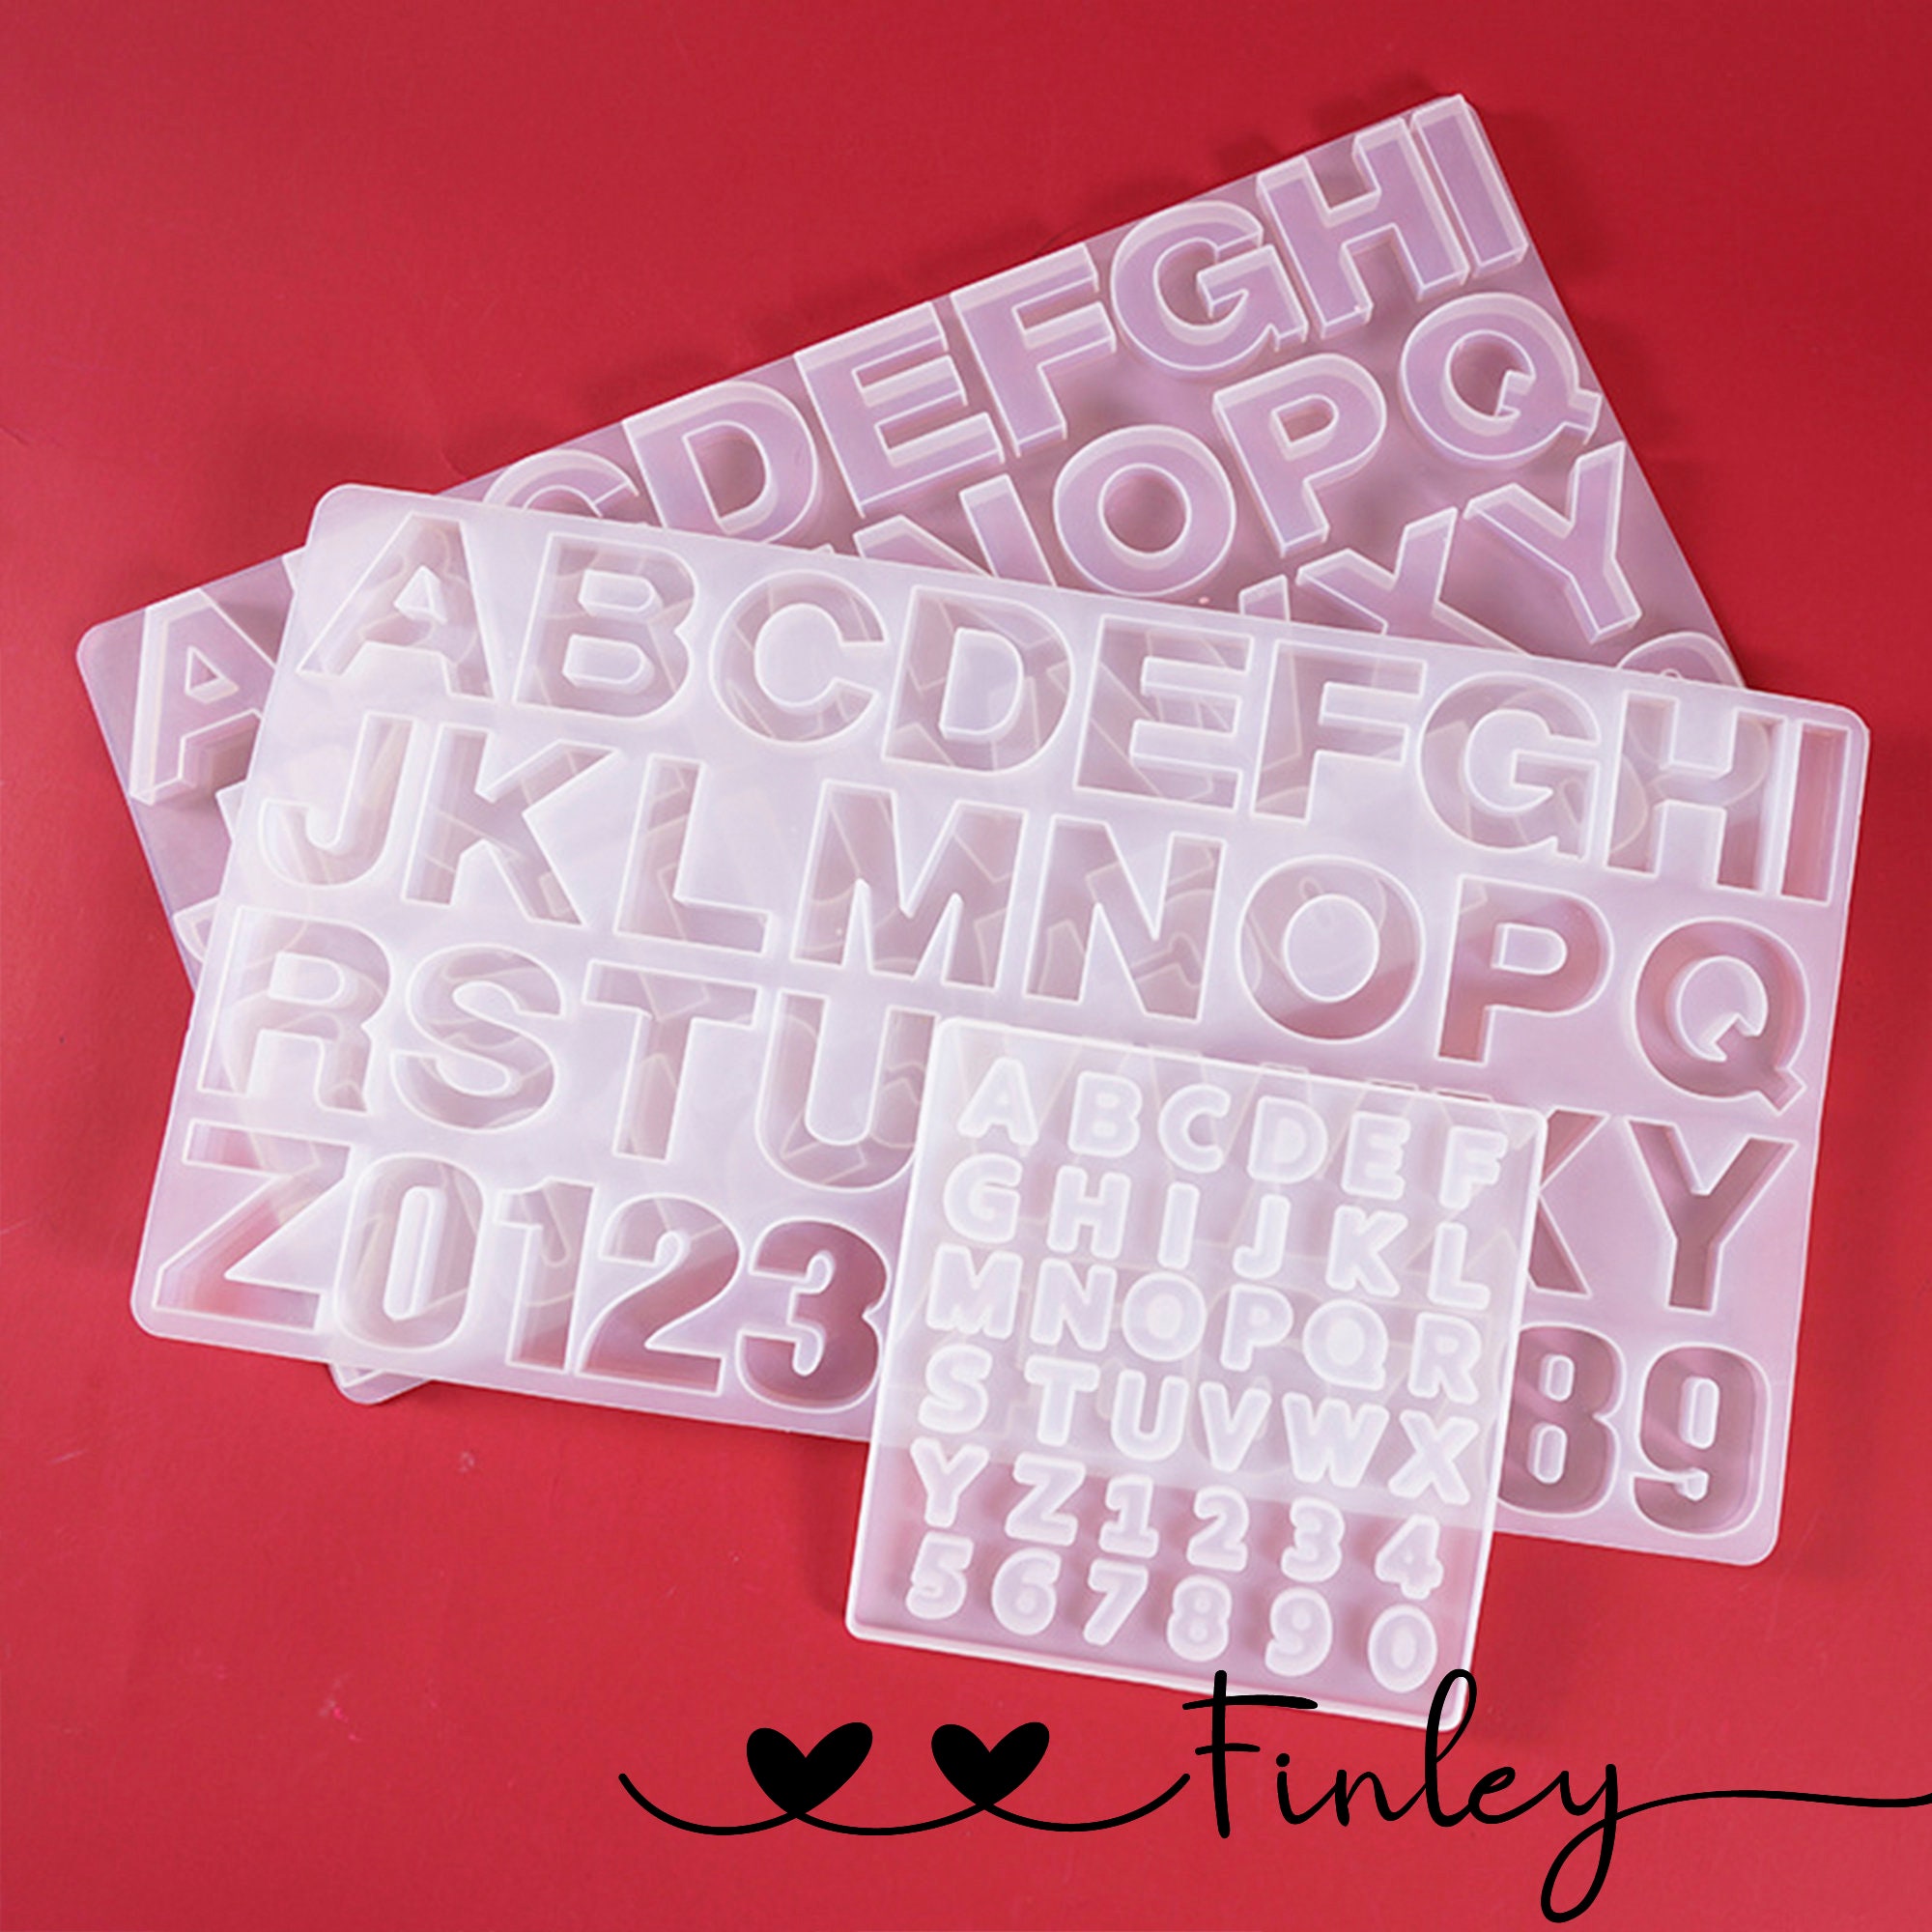 With Holes Alphabet & Number Resin Mould Letter A To Z Diy Necklace Pendant  Silicone Molds for Uv Epoxy Resin Keychain